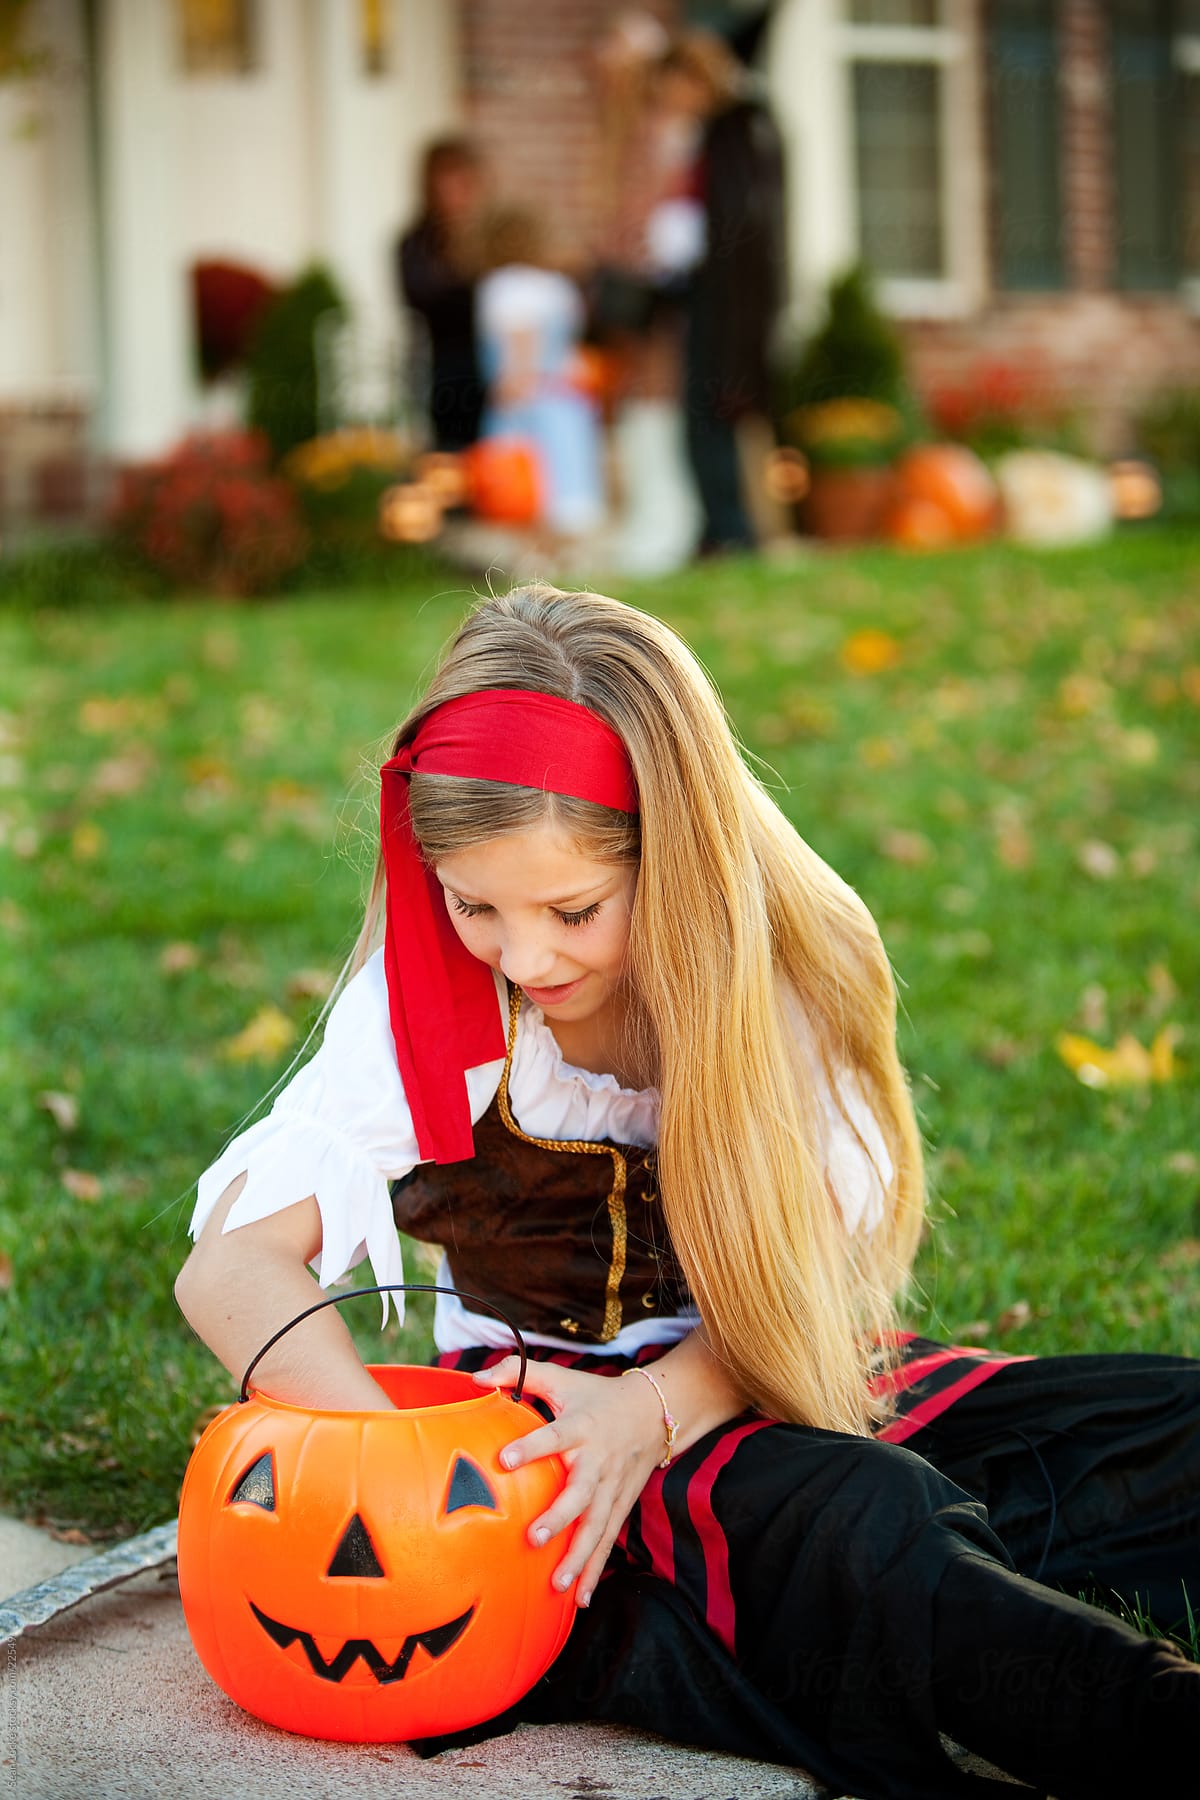 Halloween: Pirate Girl Checks Out Candy Bucket